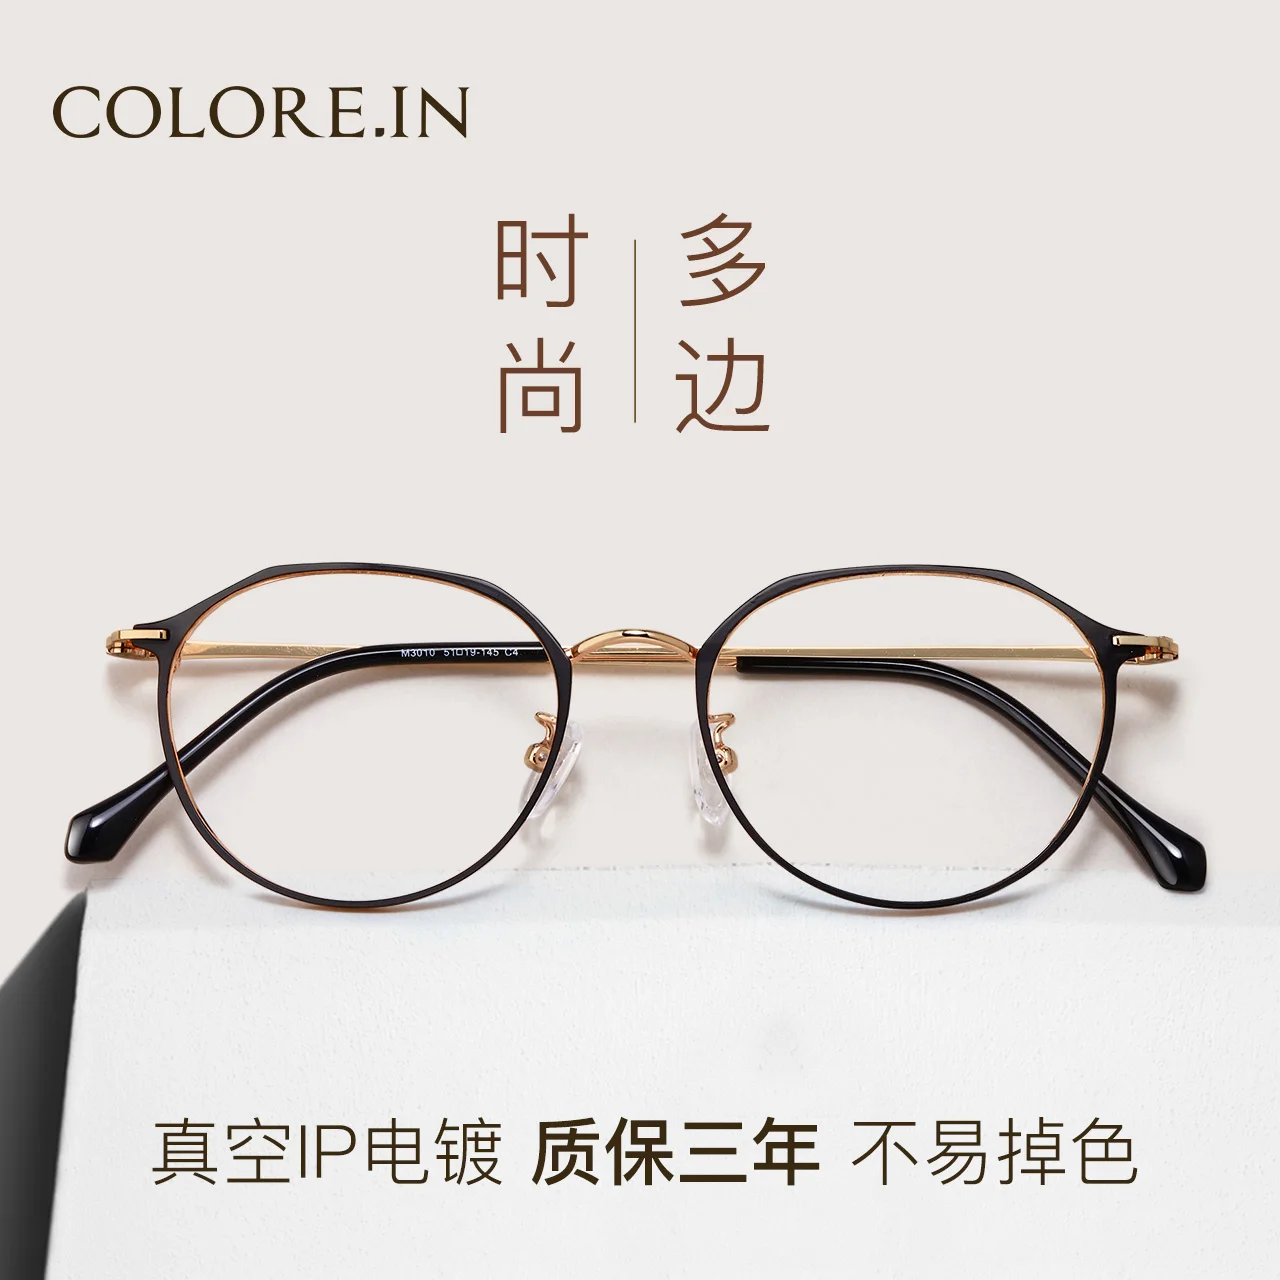 Protection against Blue Light Radiation Myopia Glasses Rim with Degrees Big Face round Face Men's Glasses Frame